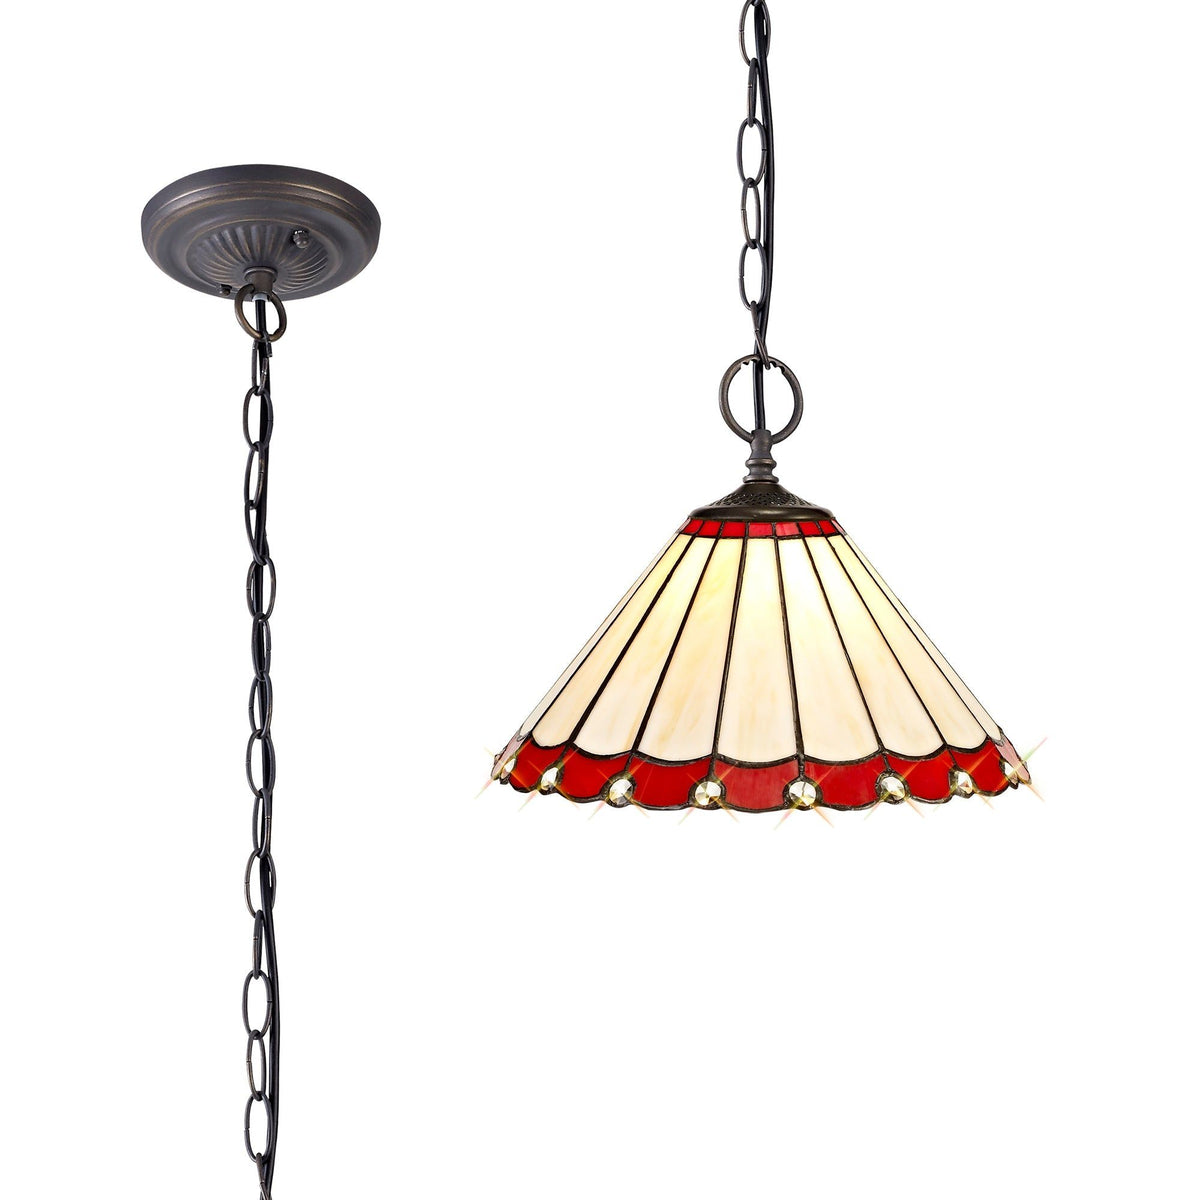 Sheitsr 2 Light Downlighter Pendant E27 With 30cm Tiffany Shade